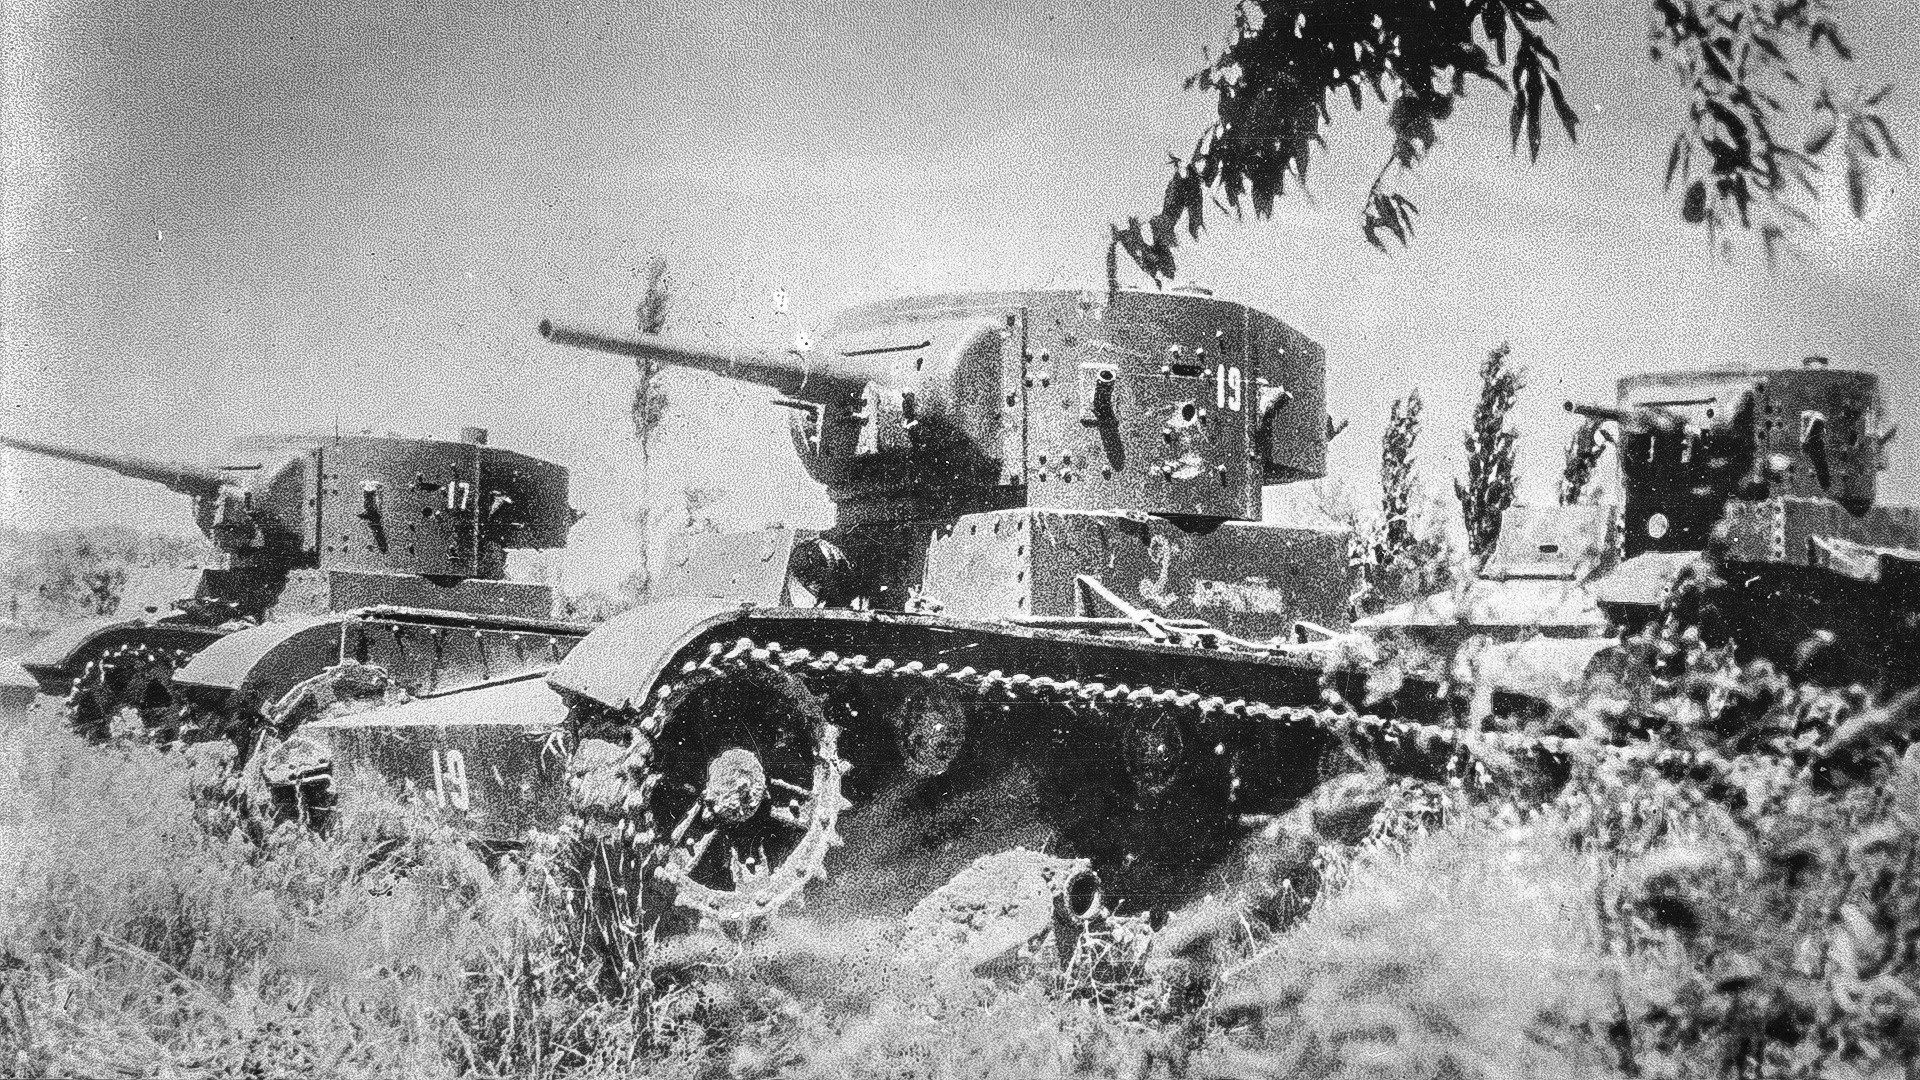 Three T-26 light tanks made in the Soviet Union travel through a field during a battle in Spain, during the Spanish Civil War.